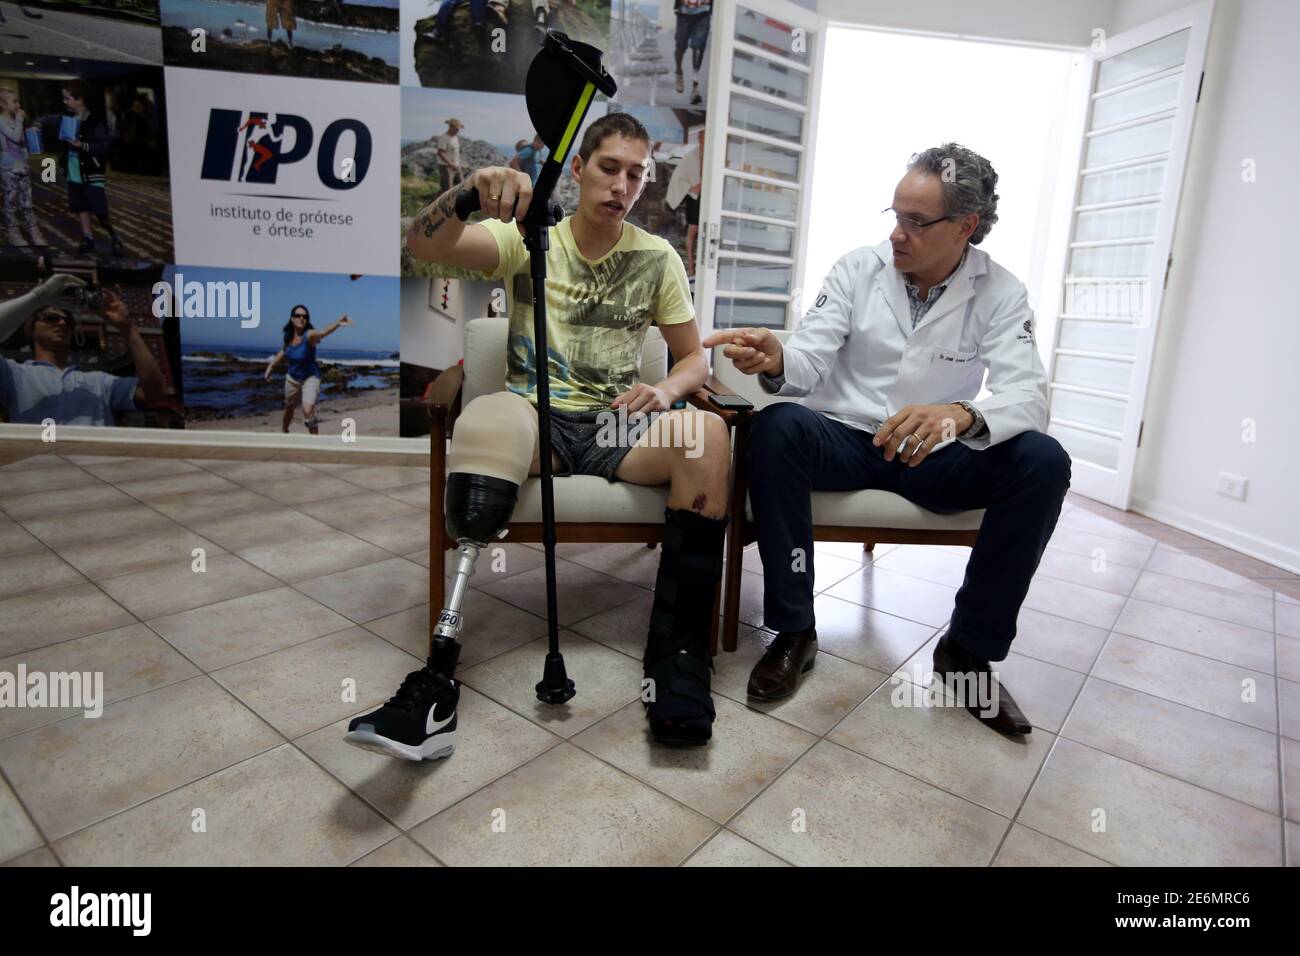 Goalkeeper Jackson Follmann, who survived when the plane carrying Brazilian soccer team Chapecoense crashed, talks with Dr. Jose Carvalho as they try on a prosthetic leg in Sao Paulo, Brazil, February 21, 2017. REUTERS/Paulo Whitaker Stock Photo